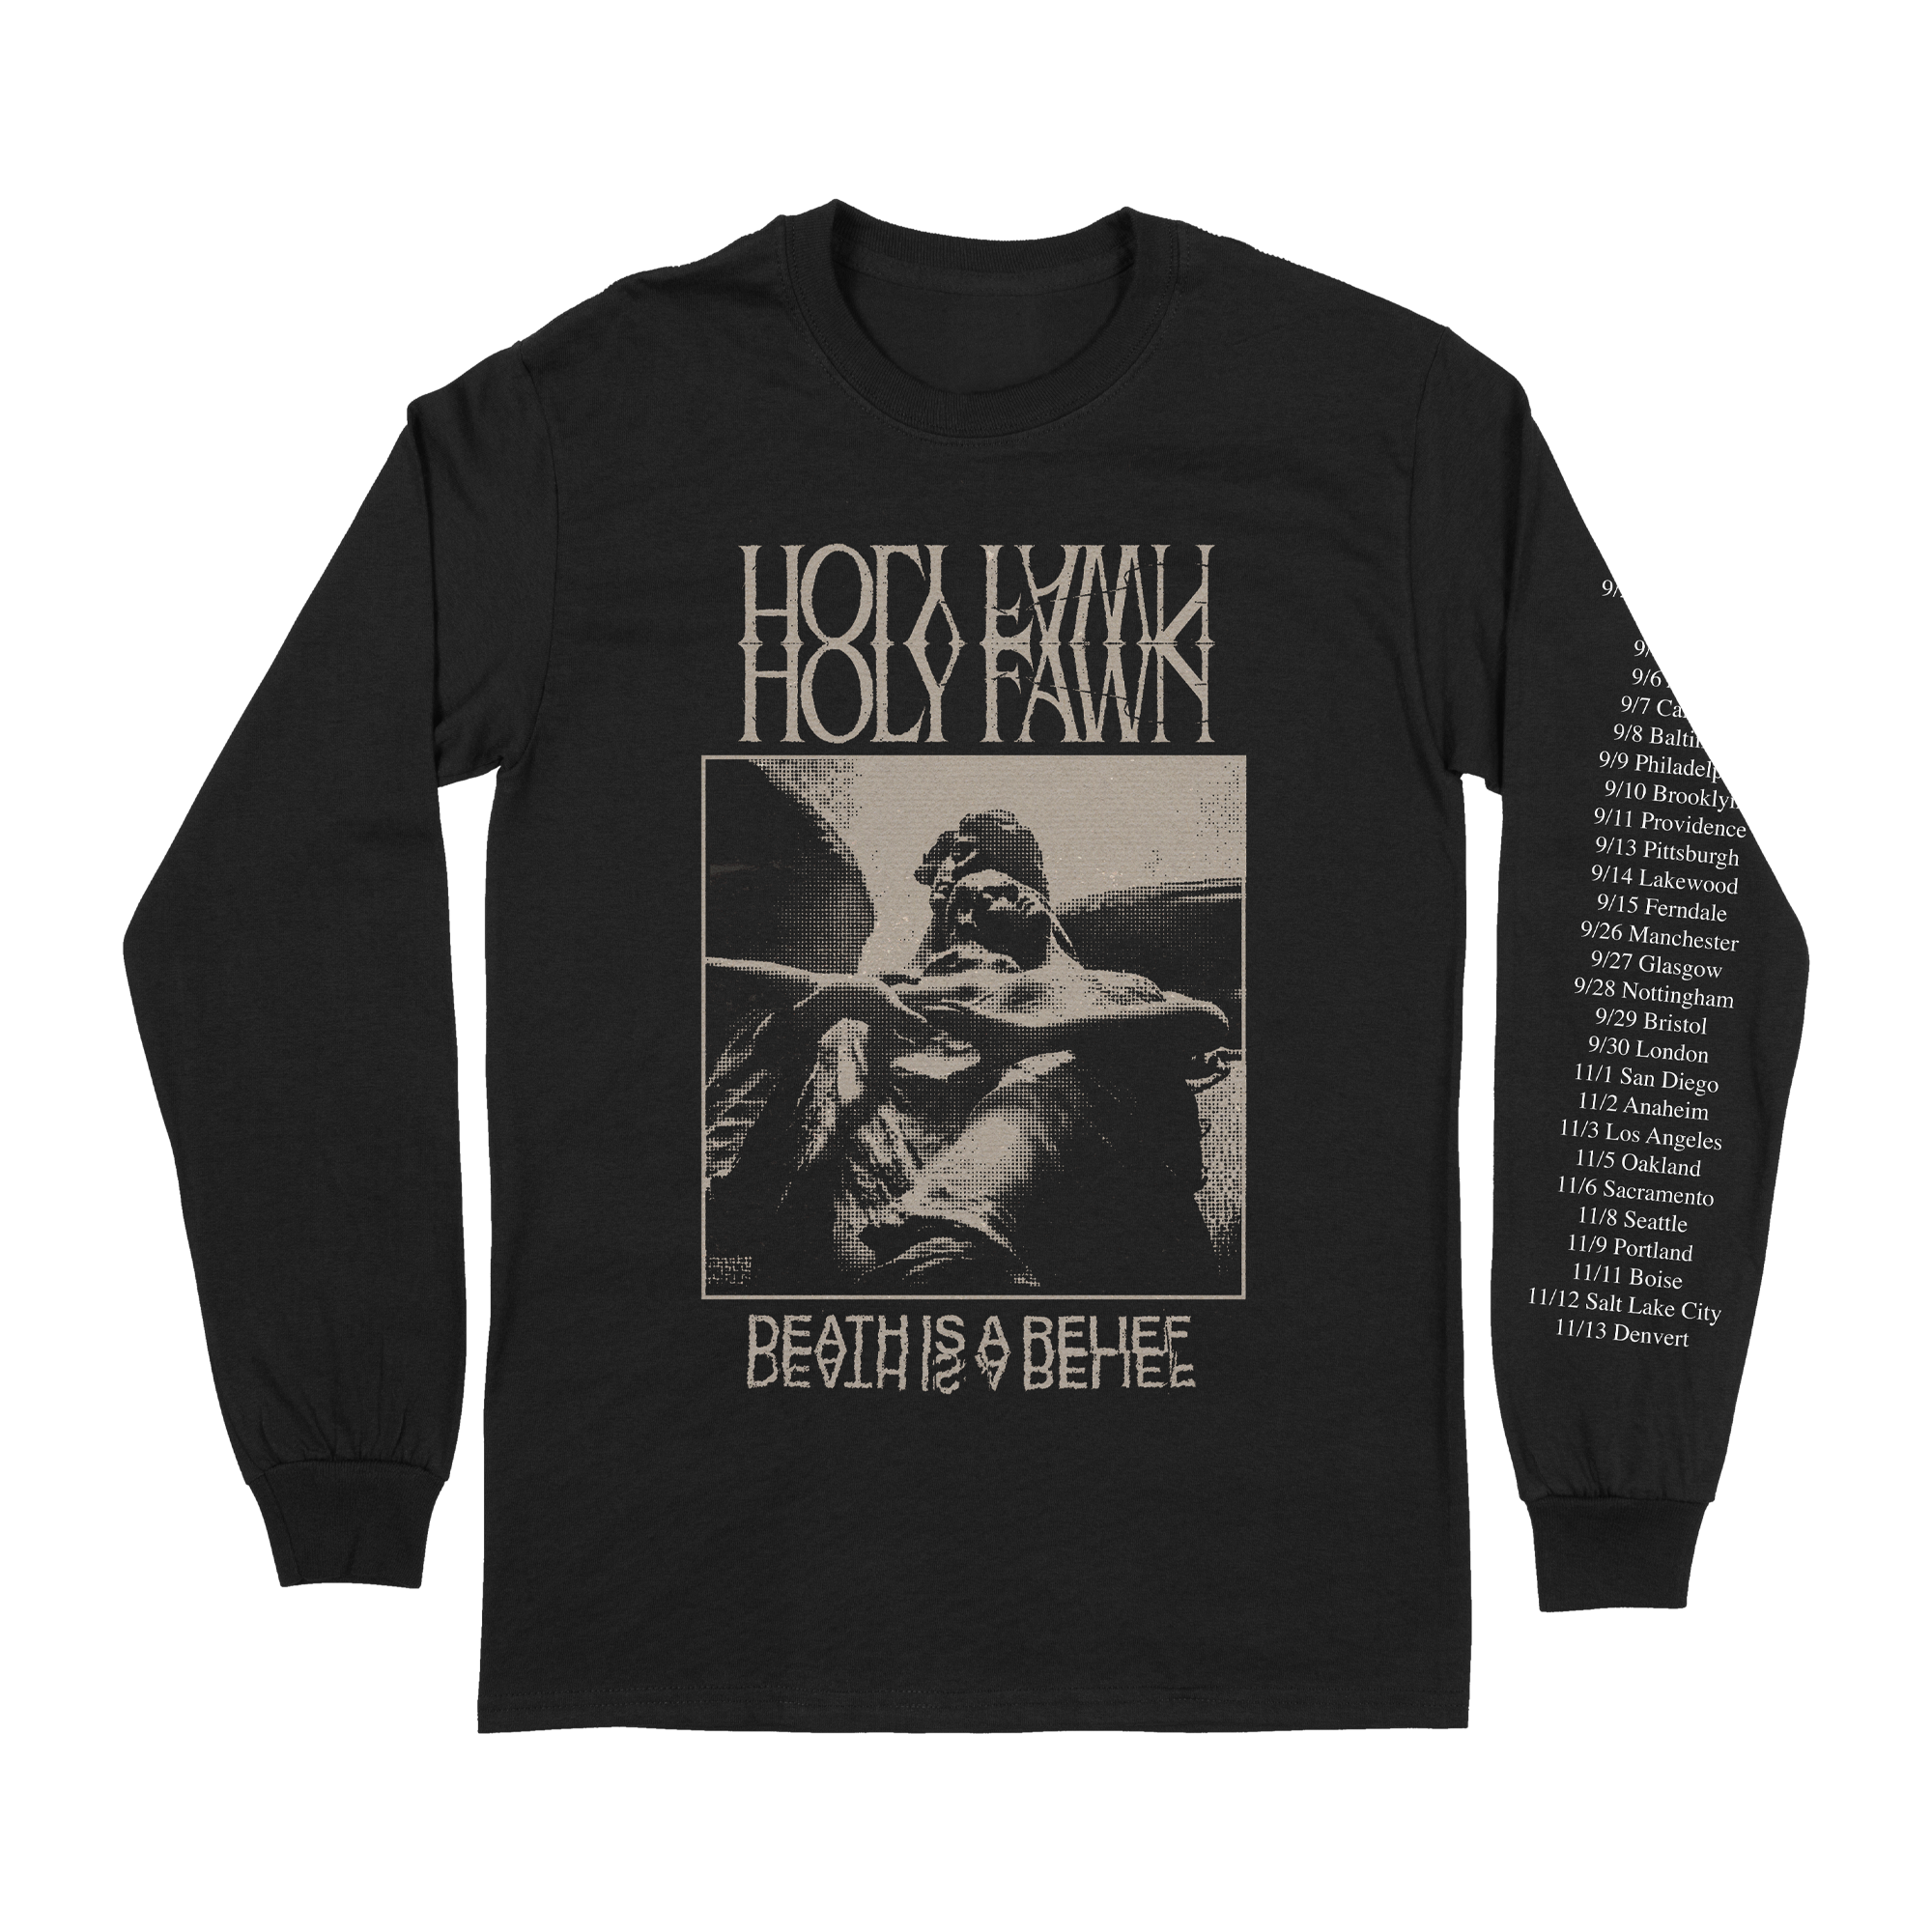 Holy Fawn - Death is a Relief Tour Long Sleeve (Limited Sizes)